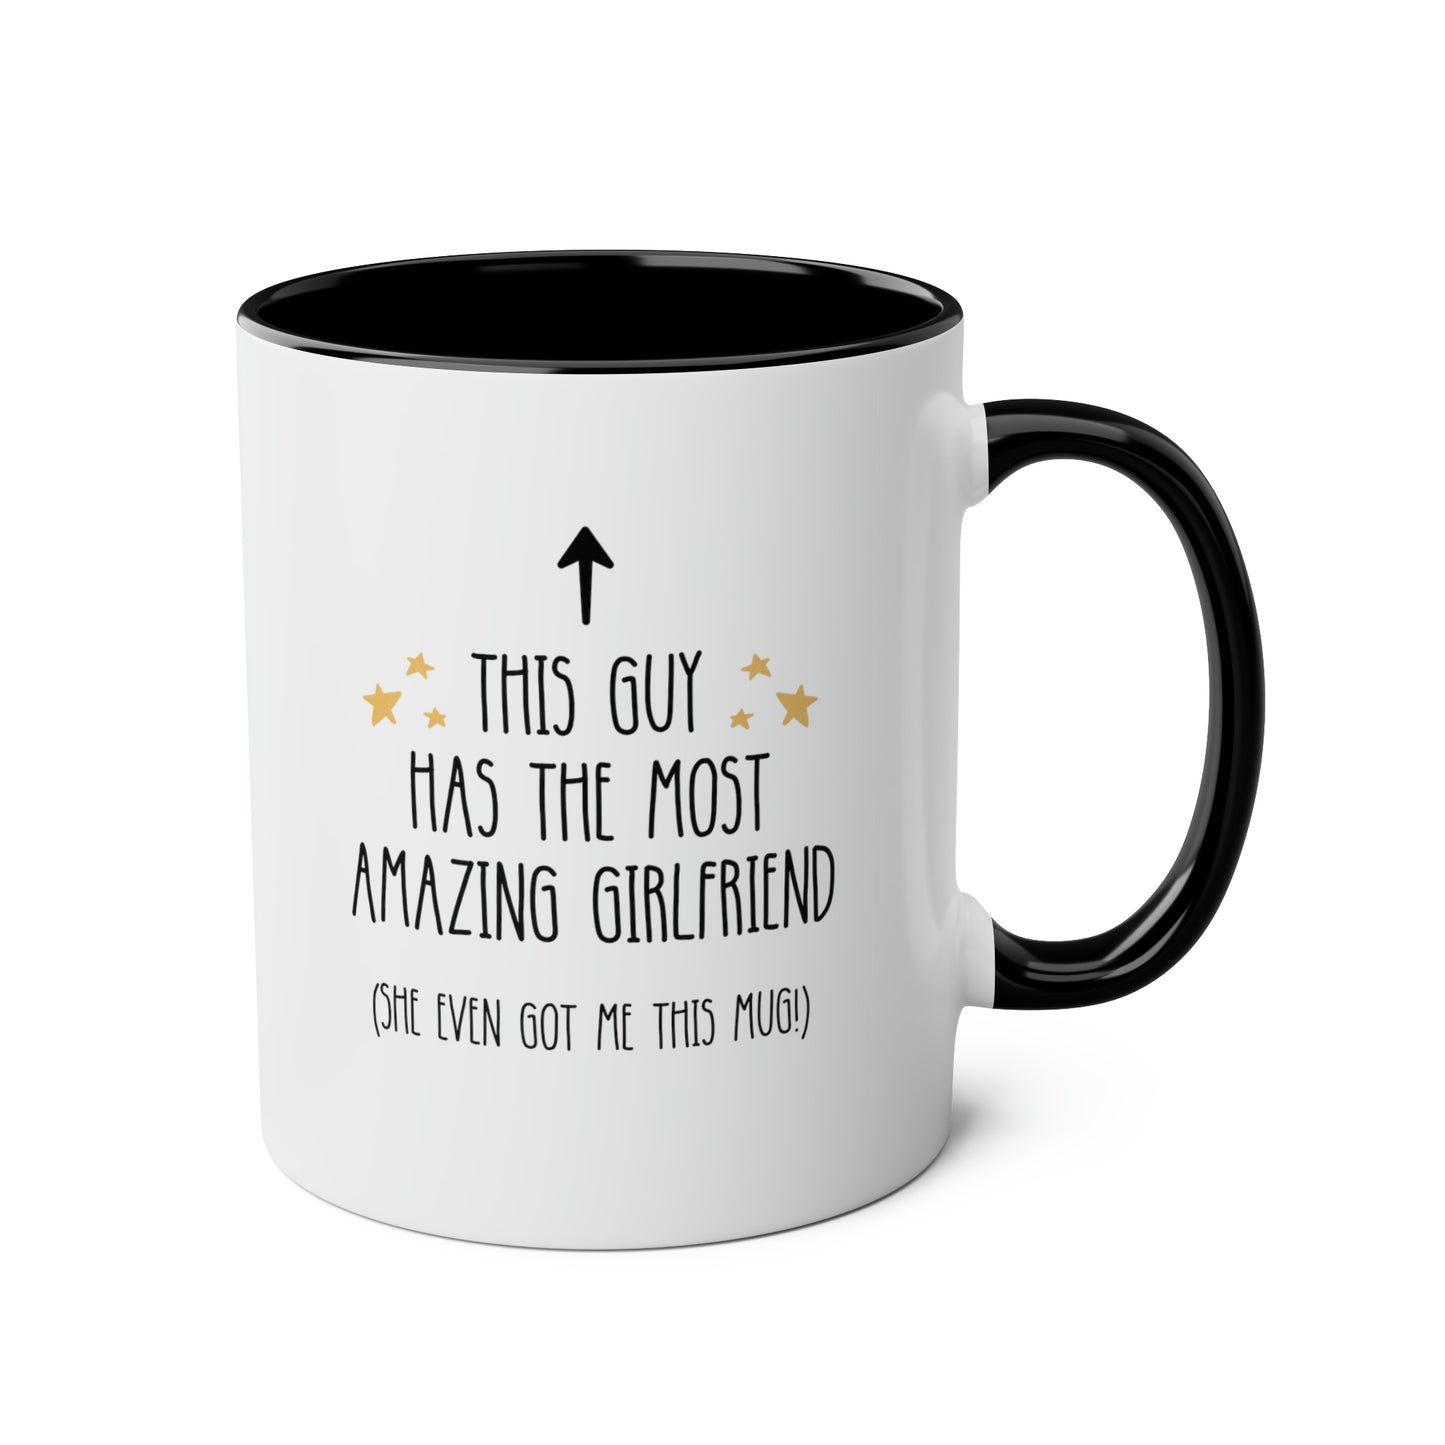 This Guy Has The Most Amazing Girlfriend 11oz white with black accent funny large coffee mug gift for boyfriend anniversary valentines him lover waveywares wavey wares wavywares wavy wares